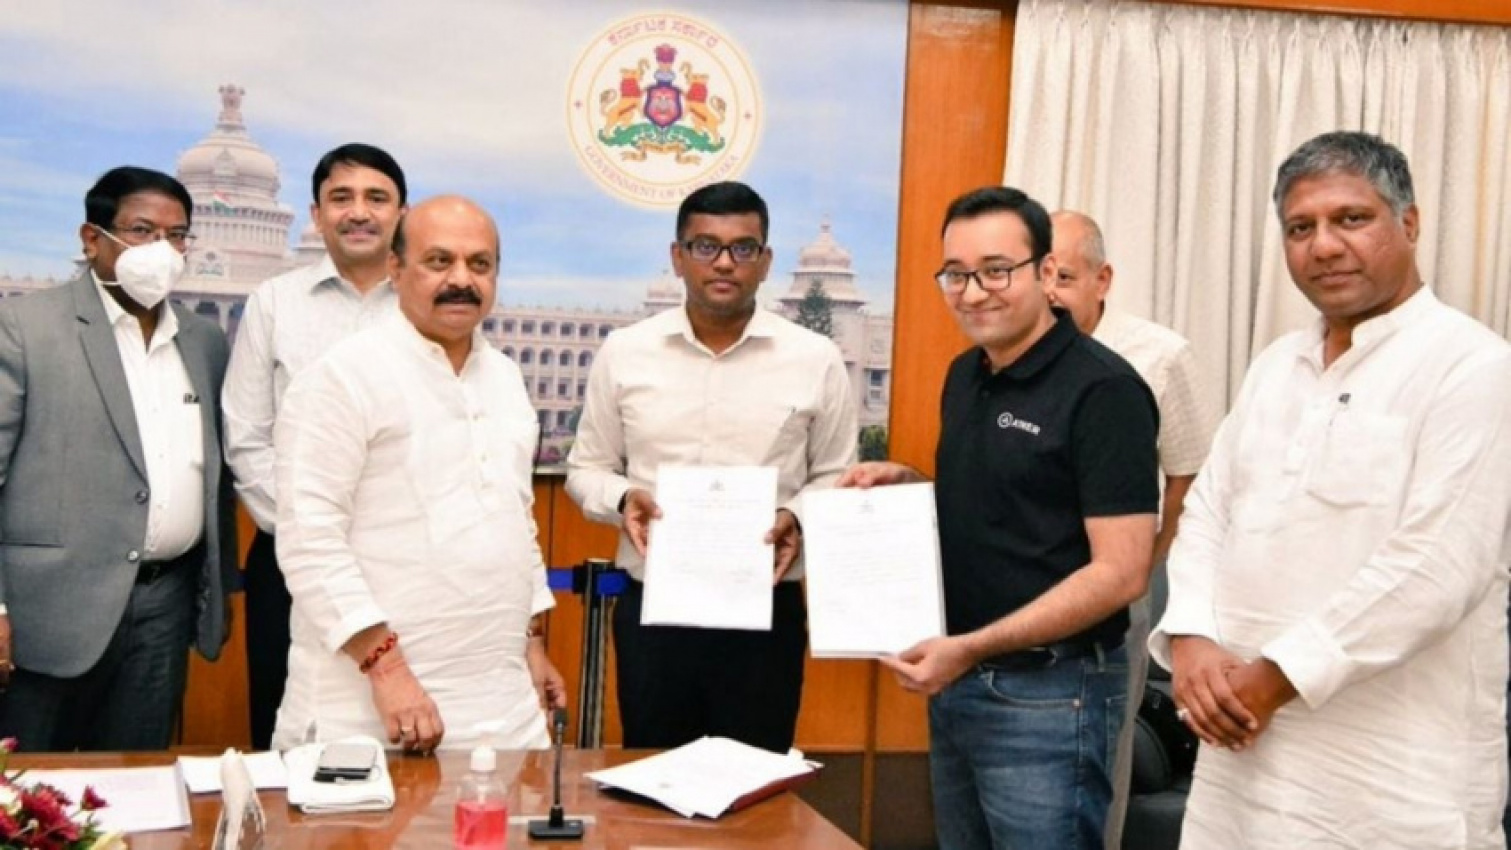 autos, cars, ather energy, ather energy ceo tarun mehta, ather energy charging infrastructure, auto news, carandbike, news, tarun mehta, ather energy signs mou with karnataka government, commits to 1,000 fast chargers